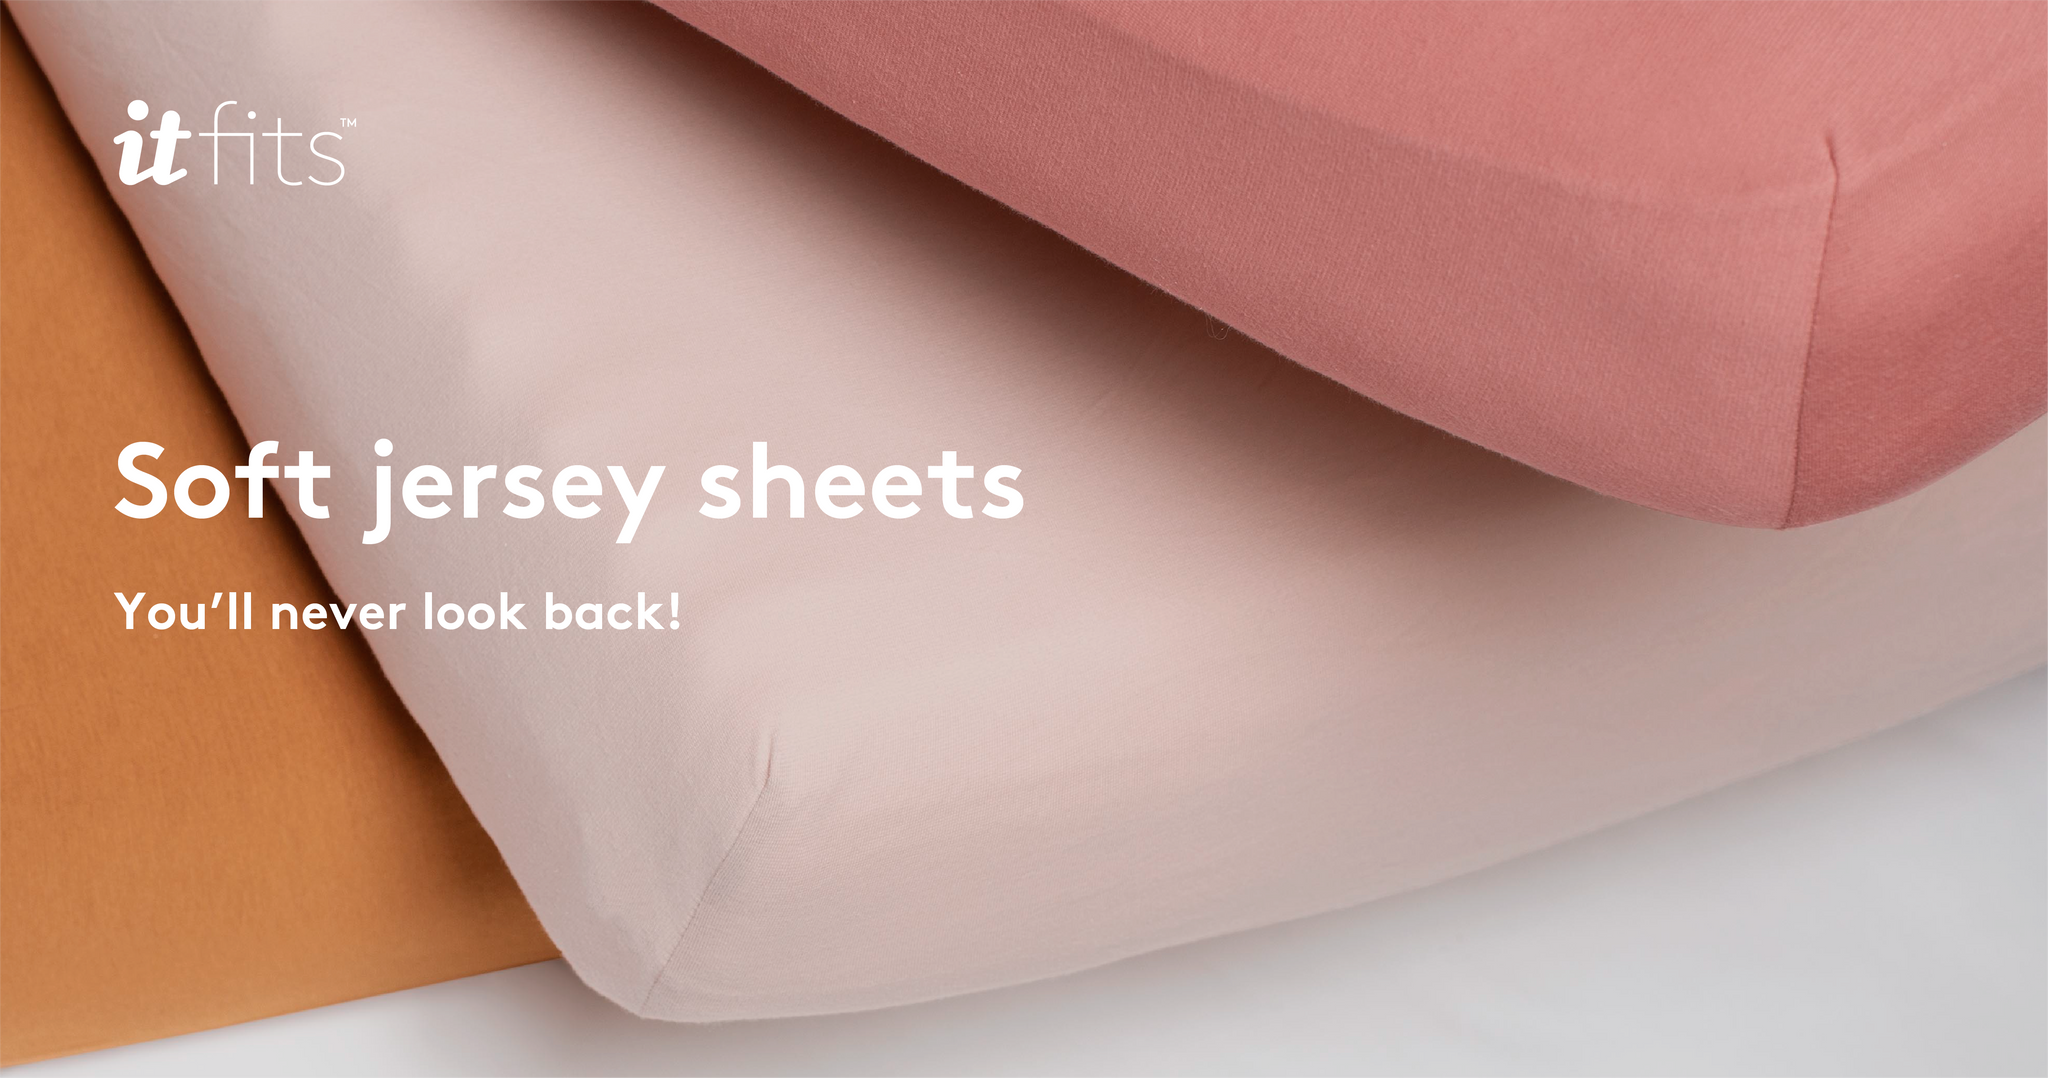 Fitted Sheet | Wide Selection Of Fitted Sheet Options- itfits